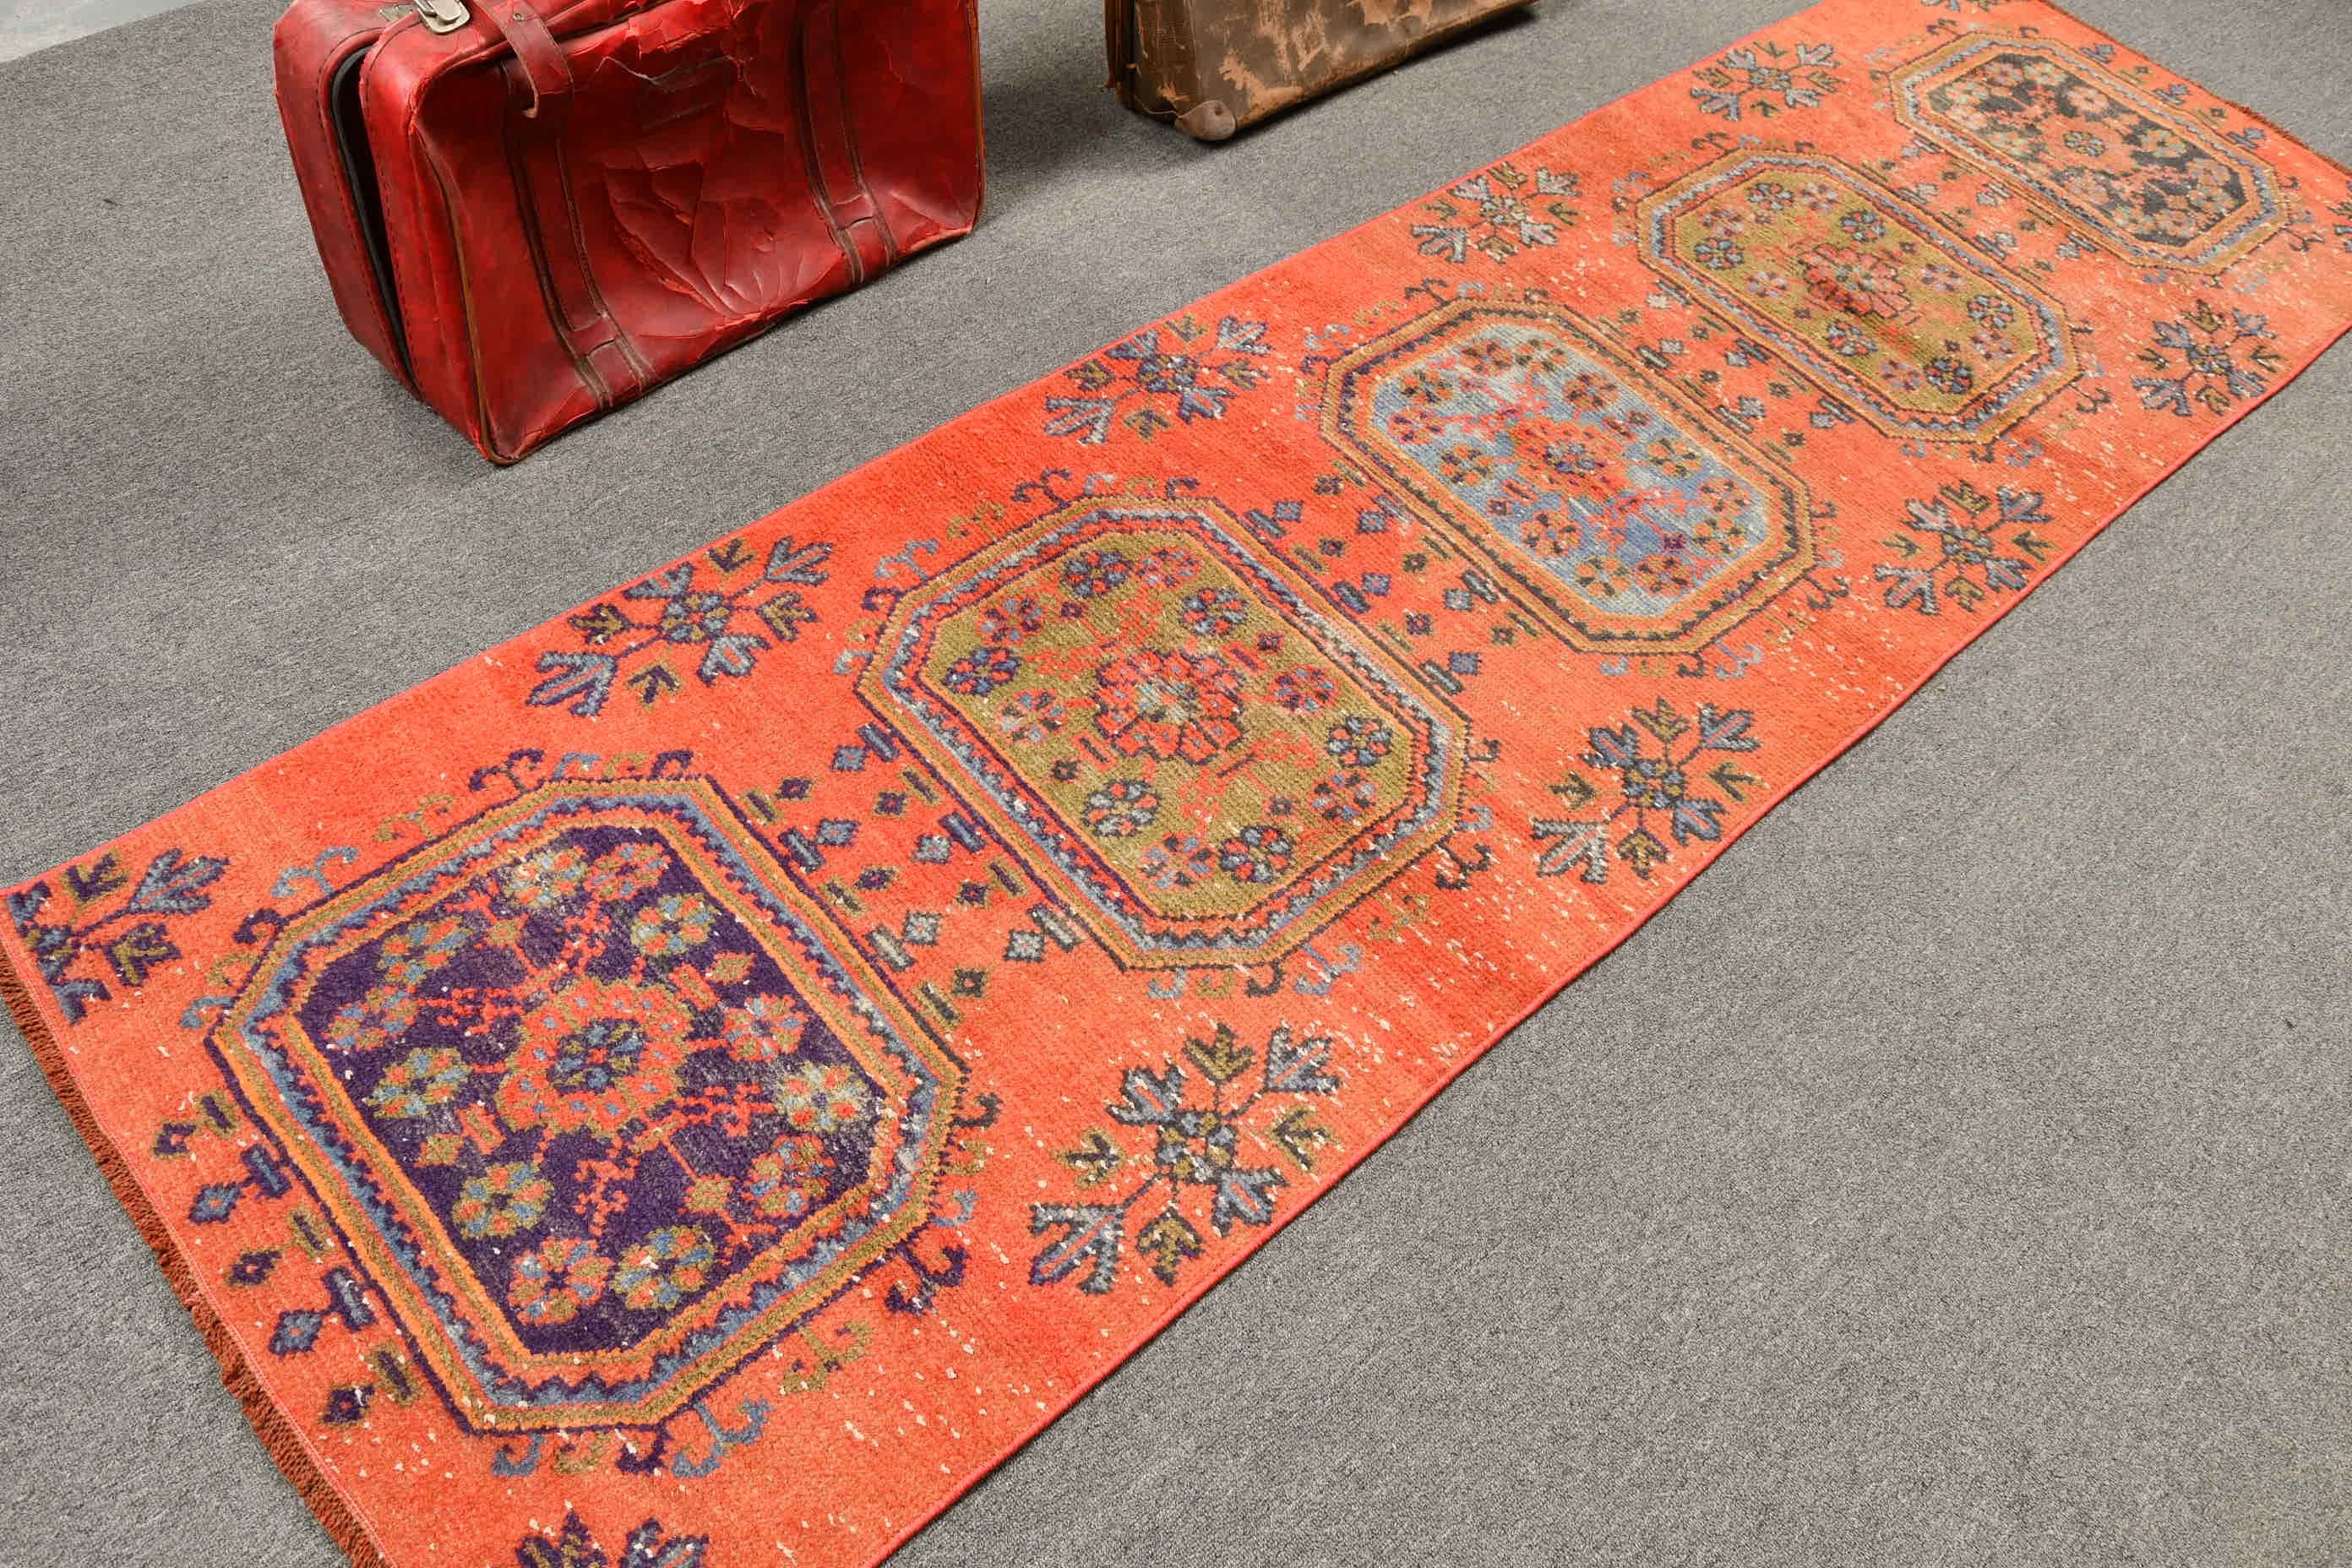 2.7x9.3 ft Runner Rugs, Turkish Rug, Red Anatolian Rug, Kitchen Rug, Rugs for Kitchen, Hallway Rugs, Vintage Rugs, Anatolian Rug, Dorm Rugs